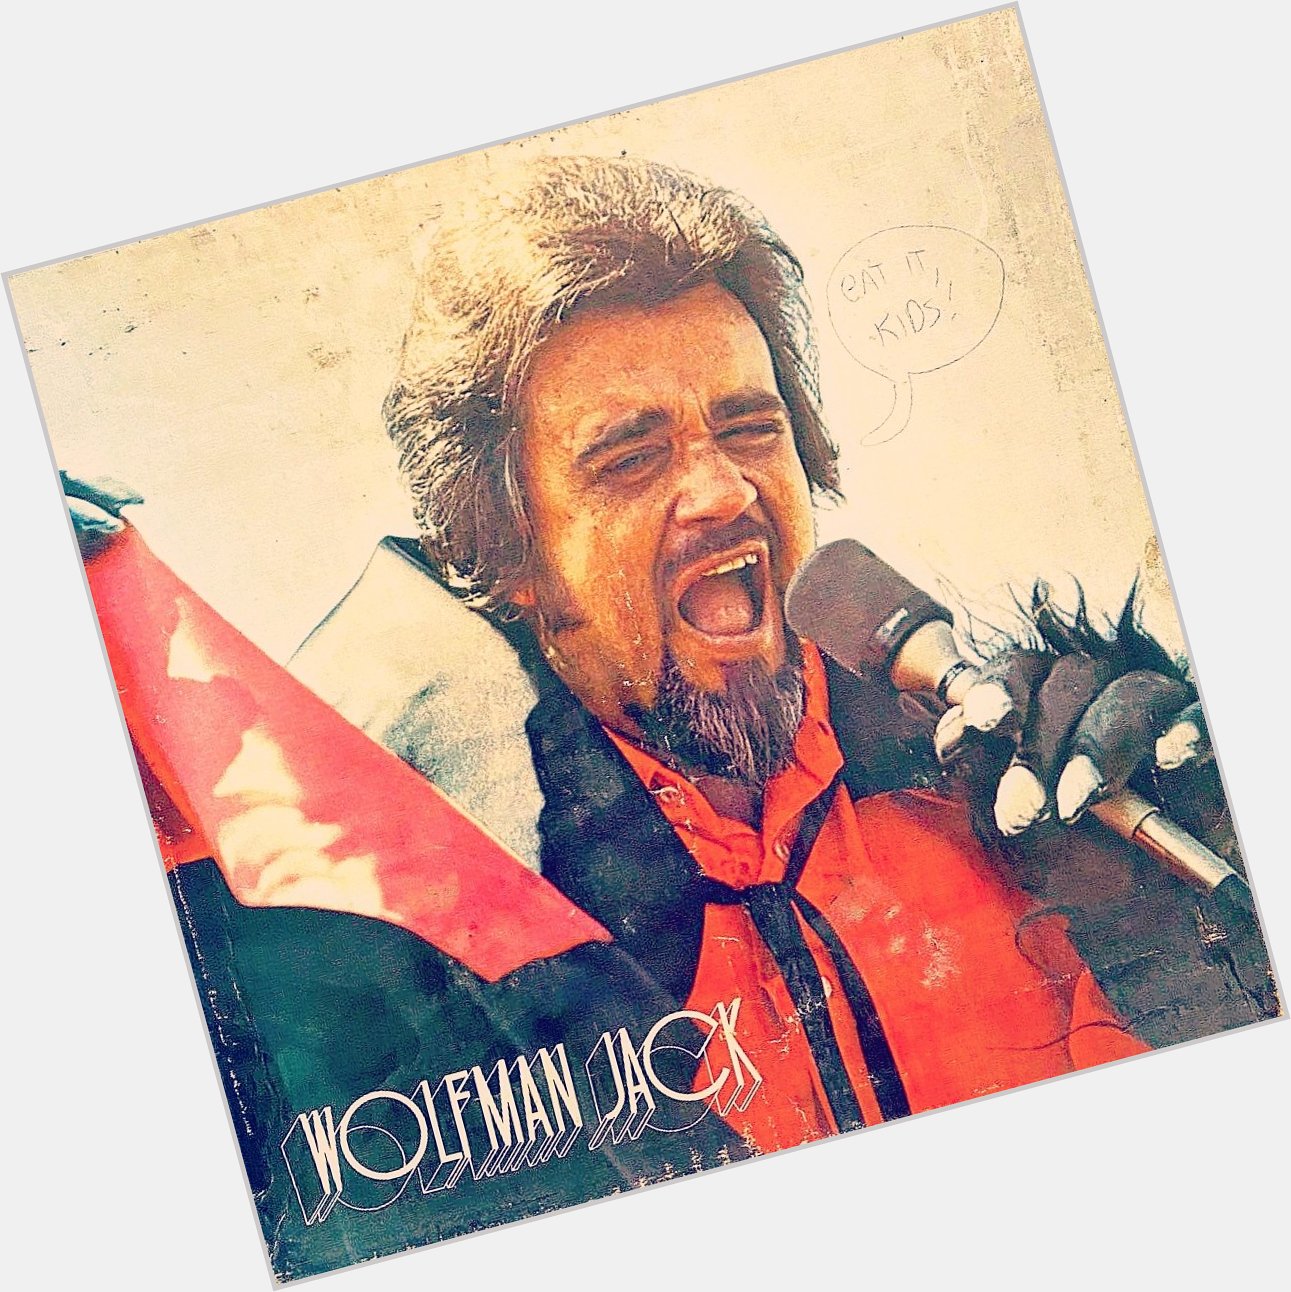 Happy 85th birthday to Wolfman Jack, patron saint of rock \n\ roll radio DJs everywhere, born this date in 1938. 